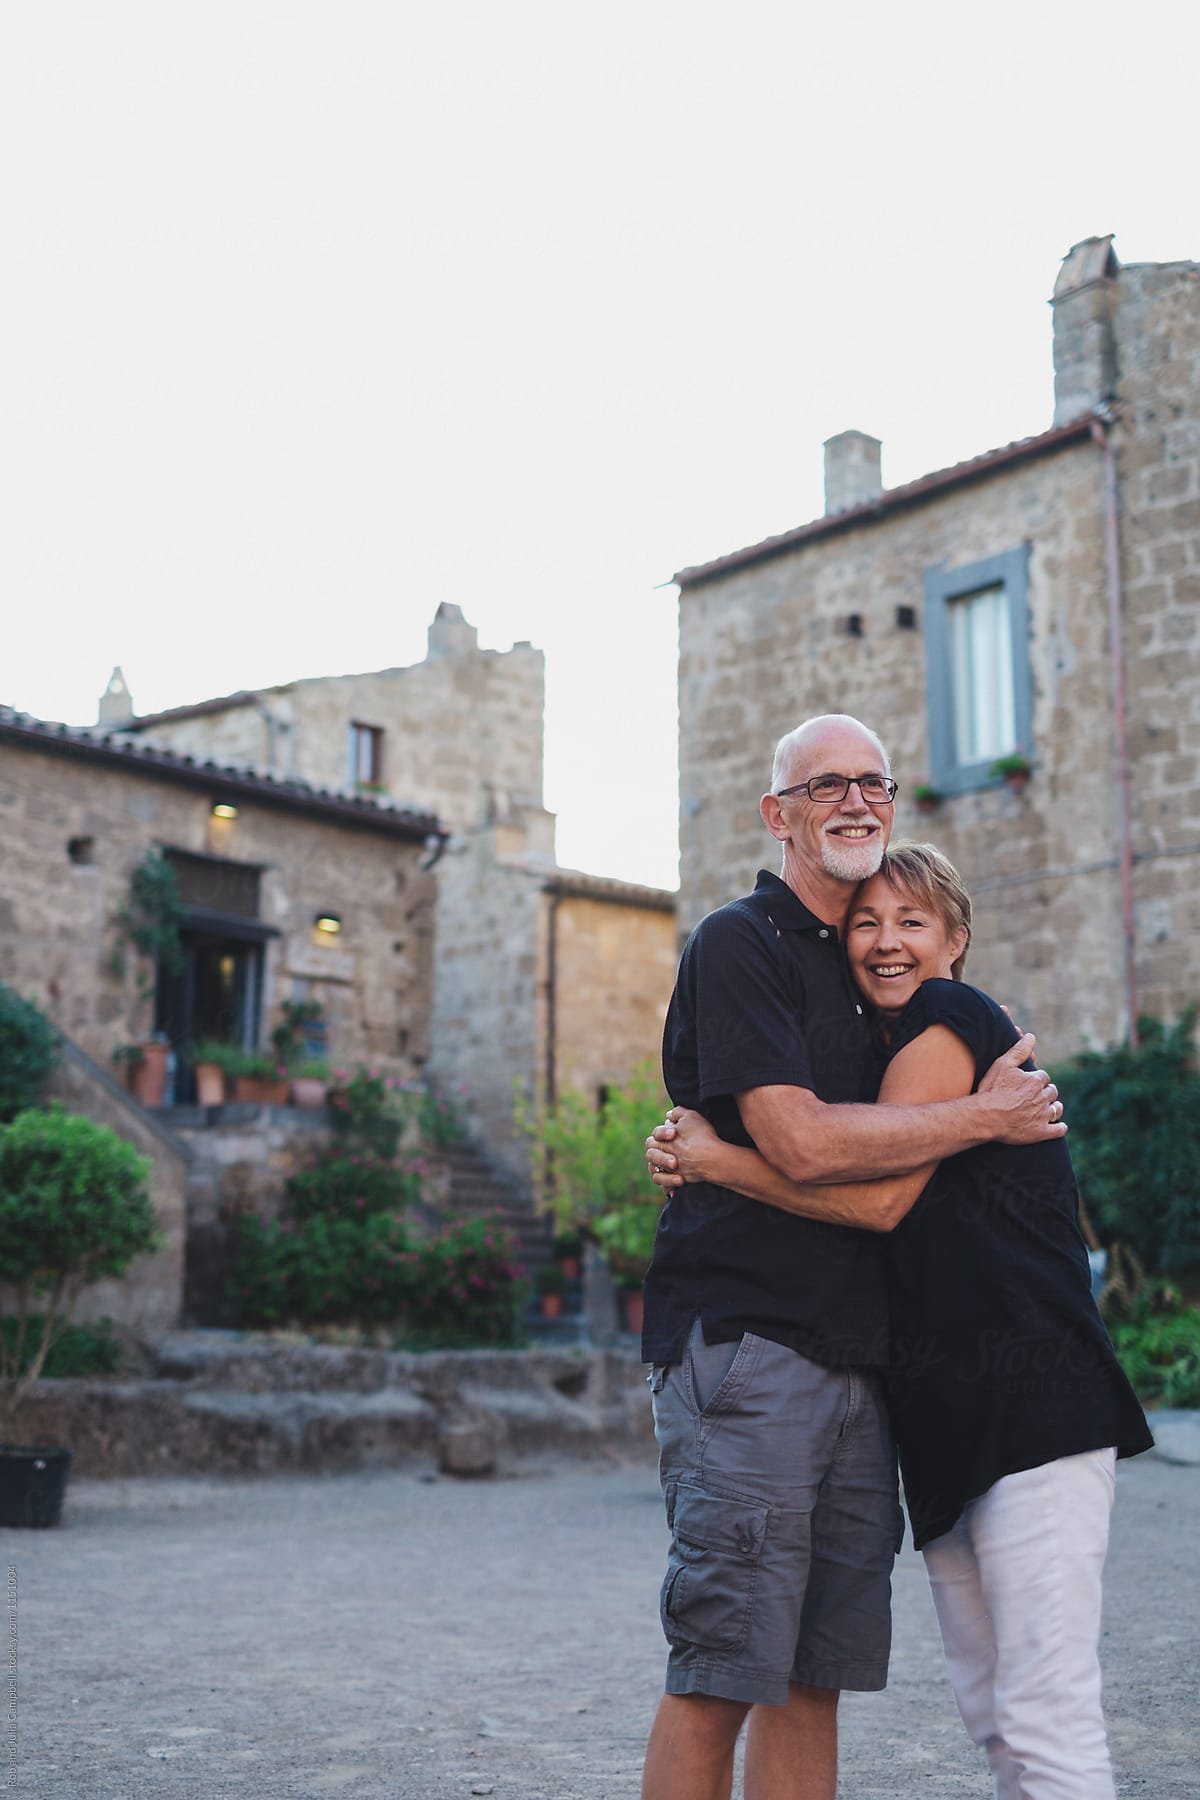 Happy middle age couple together in old Tuscan town